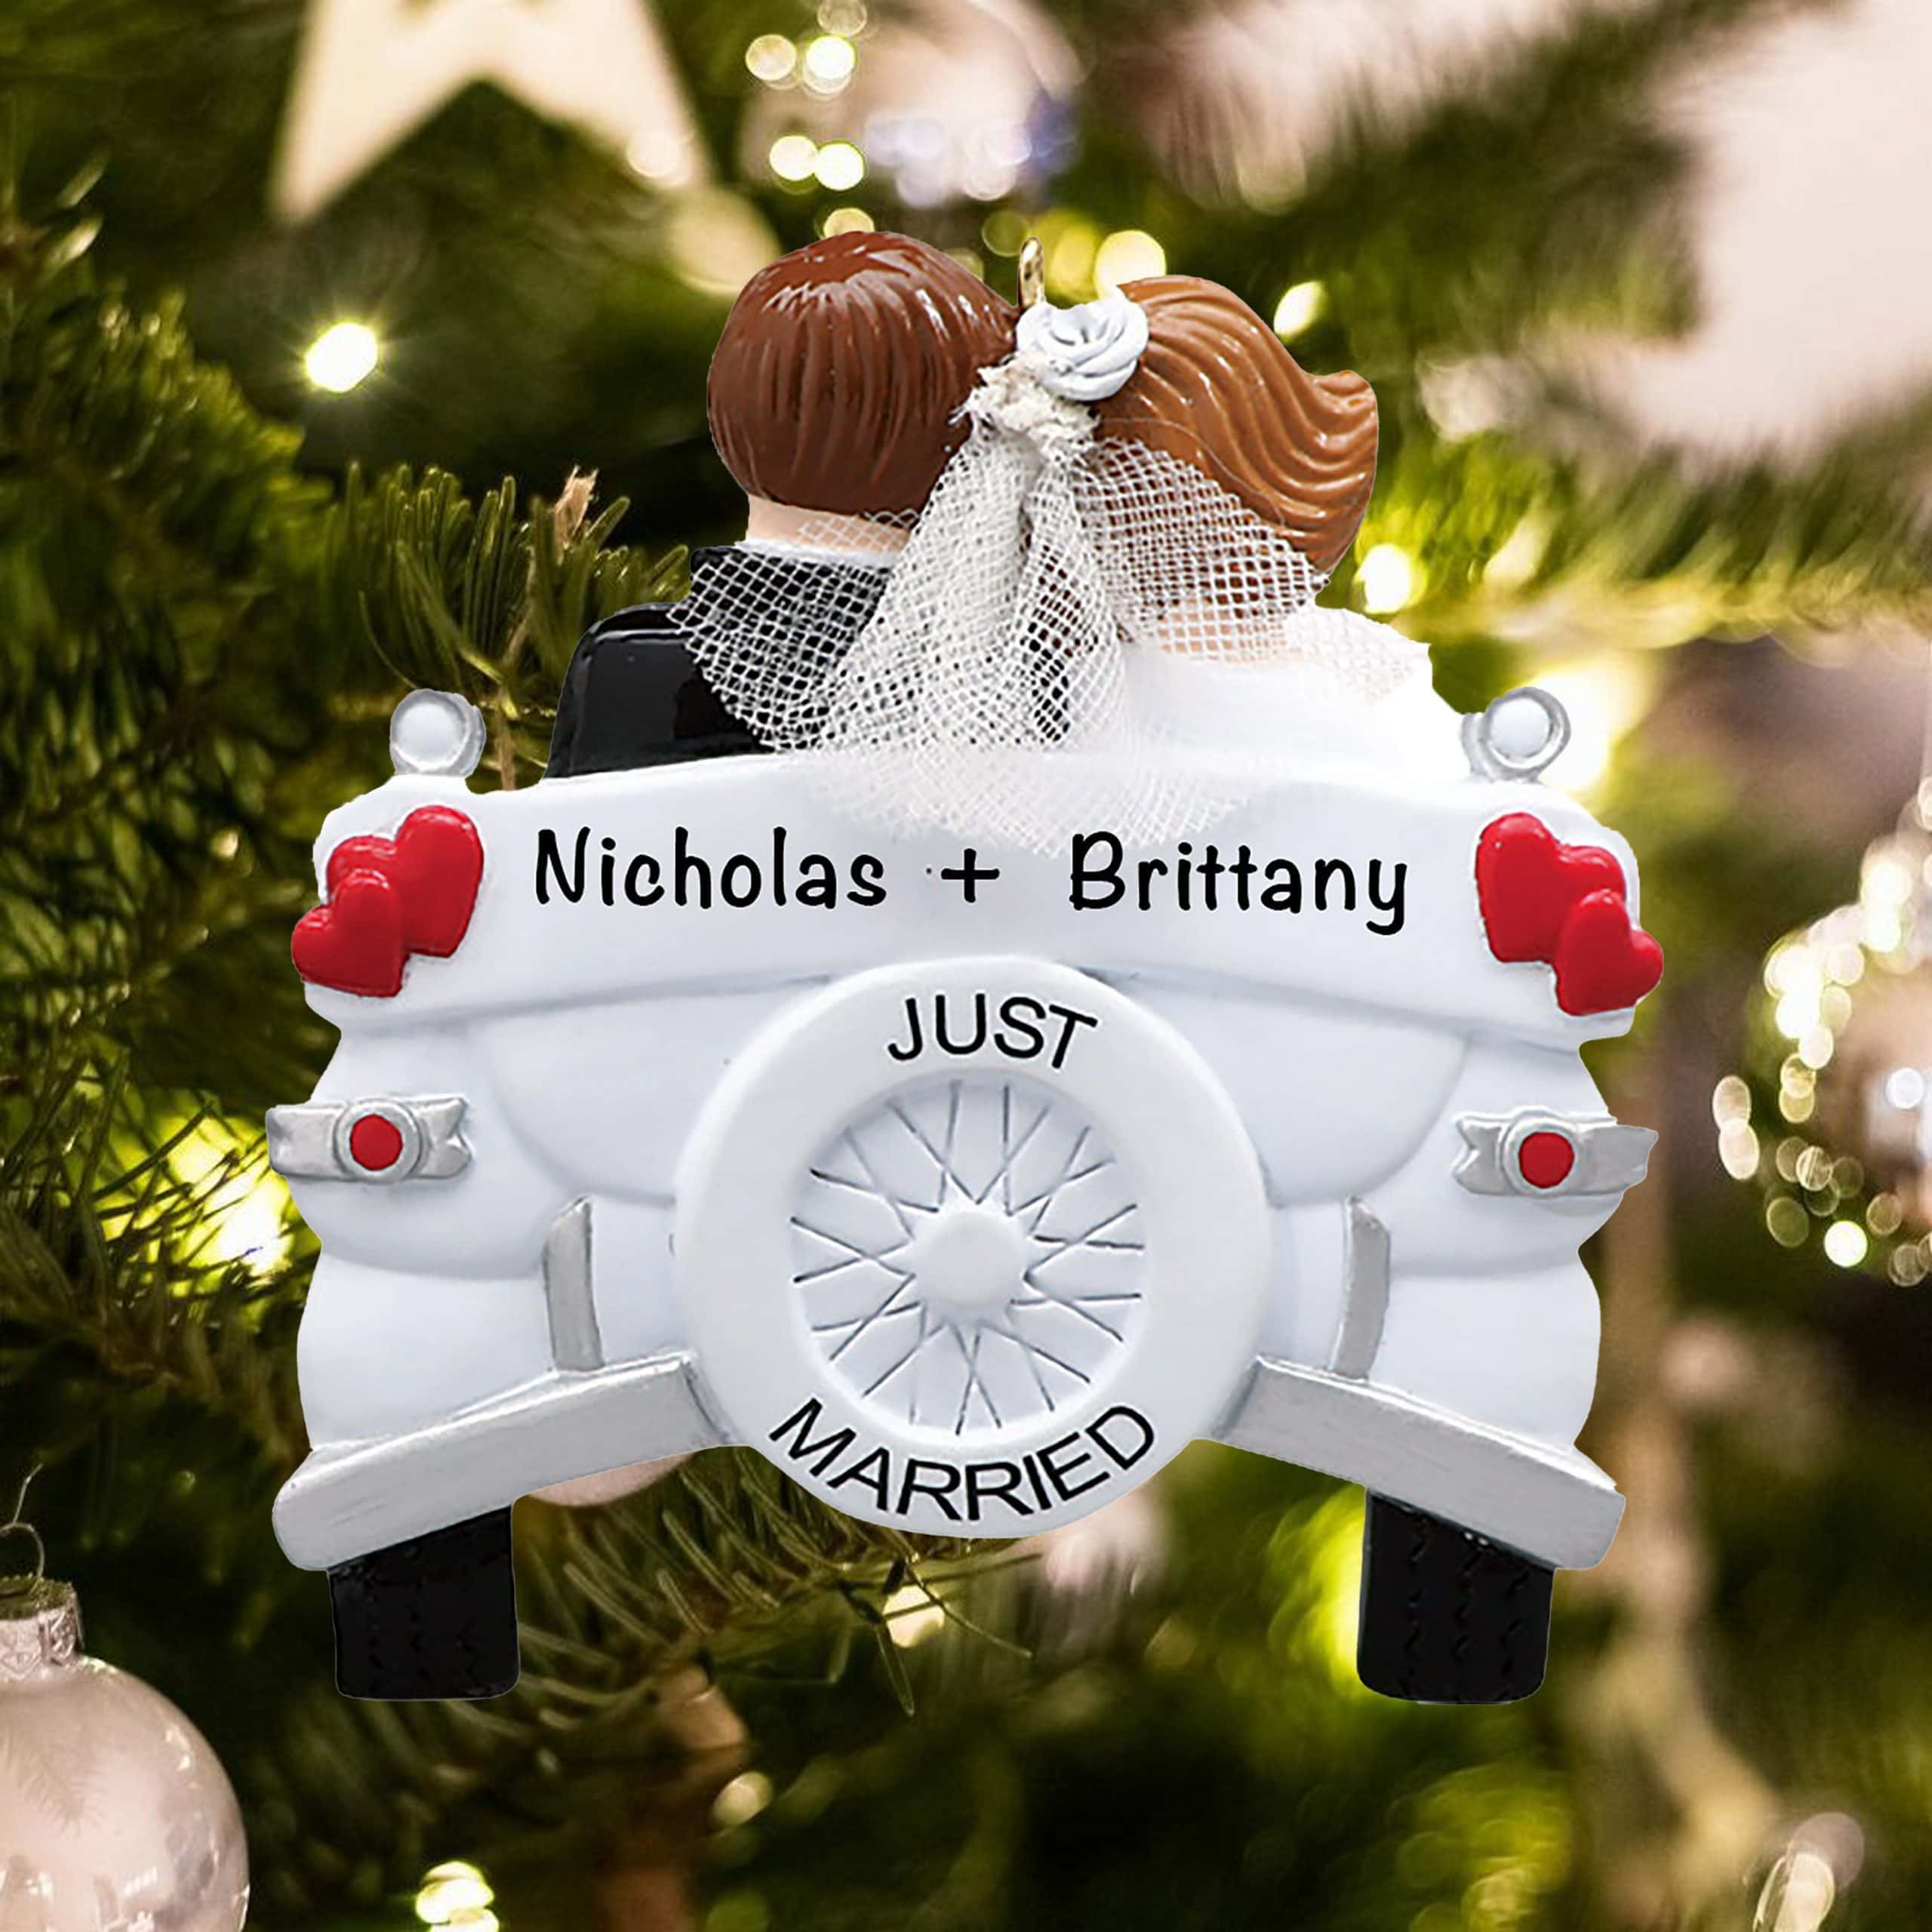 Wedding 2016 Personalized Christmas Ornament